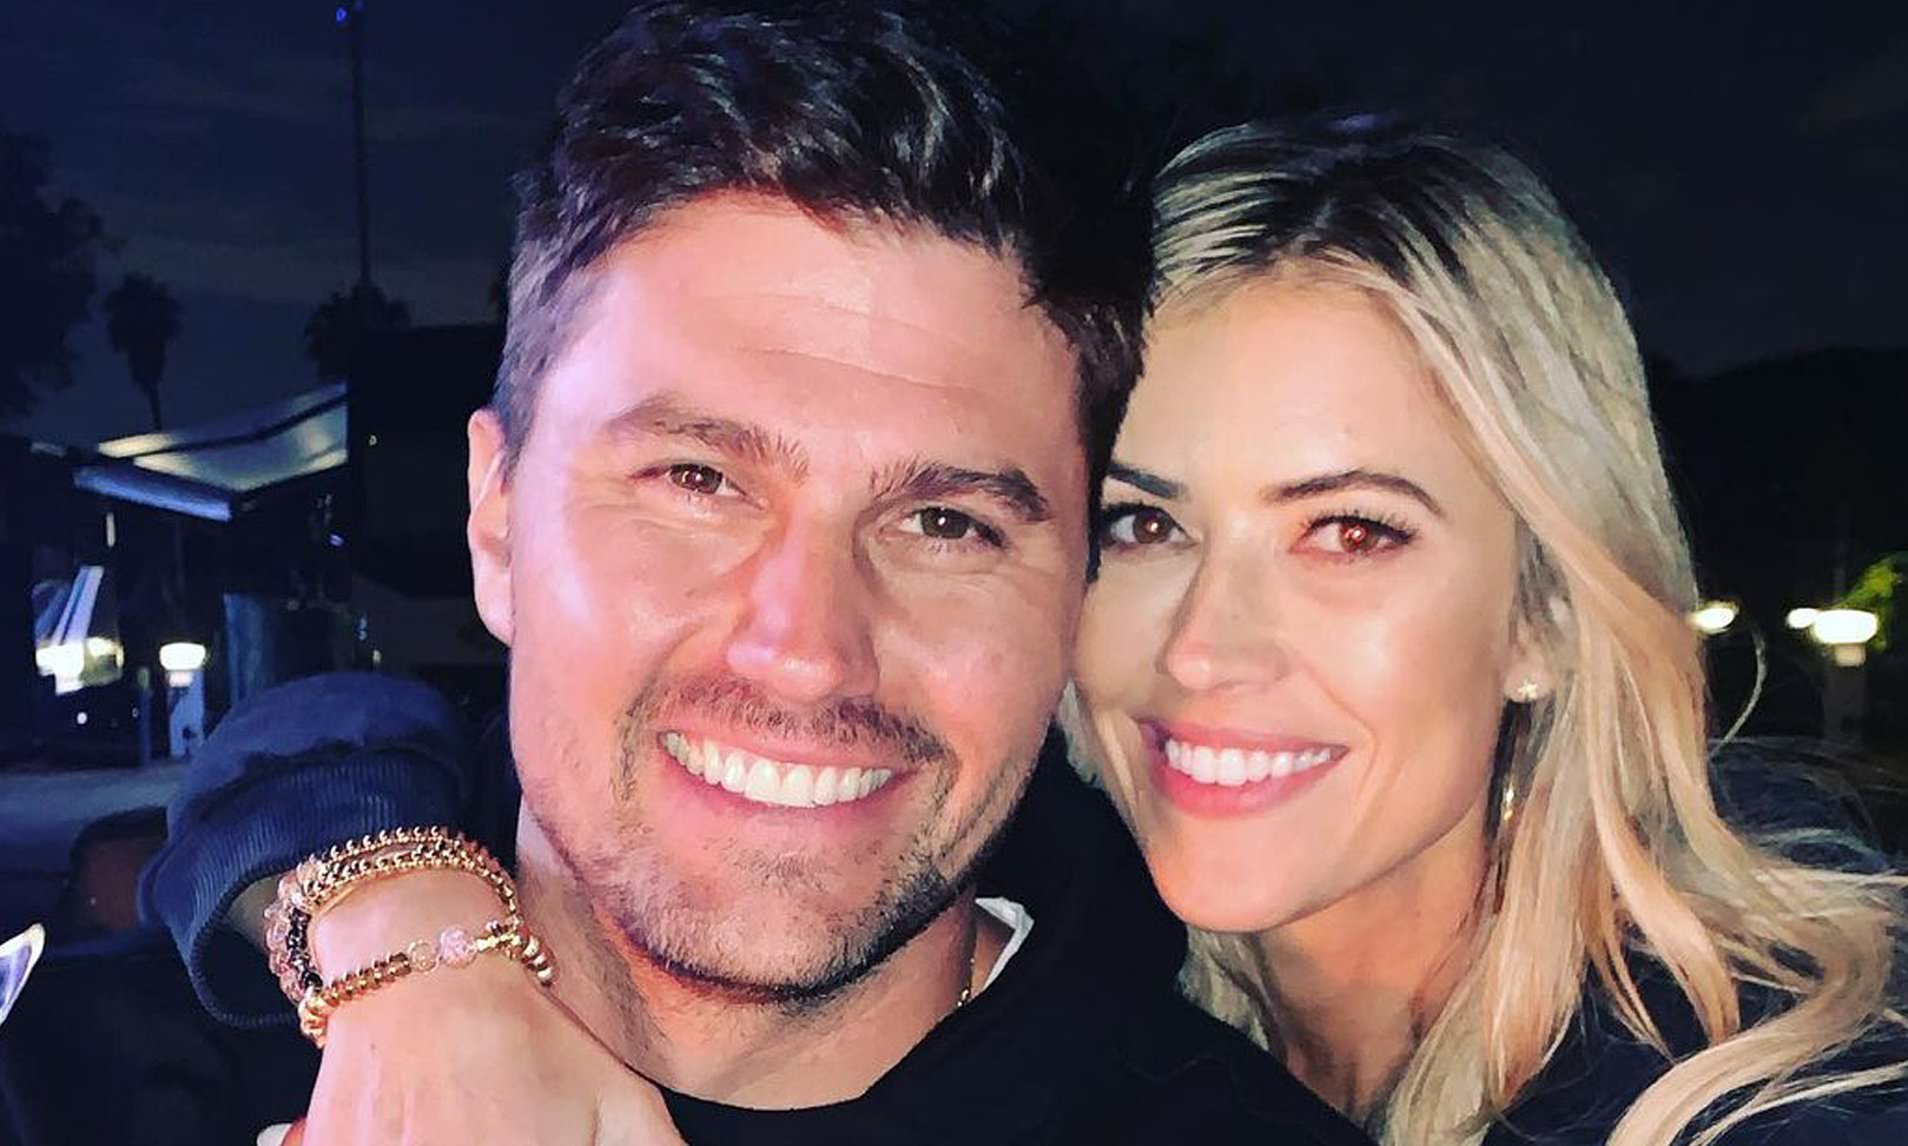 ‘People are way too concerned about other people’s lives’: Christina Haack hits back at nasty comments amid new romance with Joshua Hall